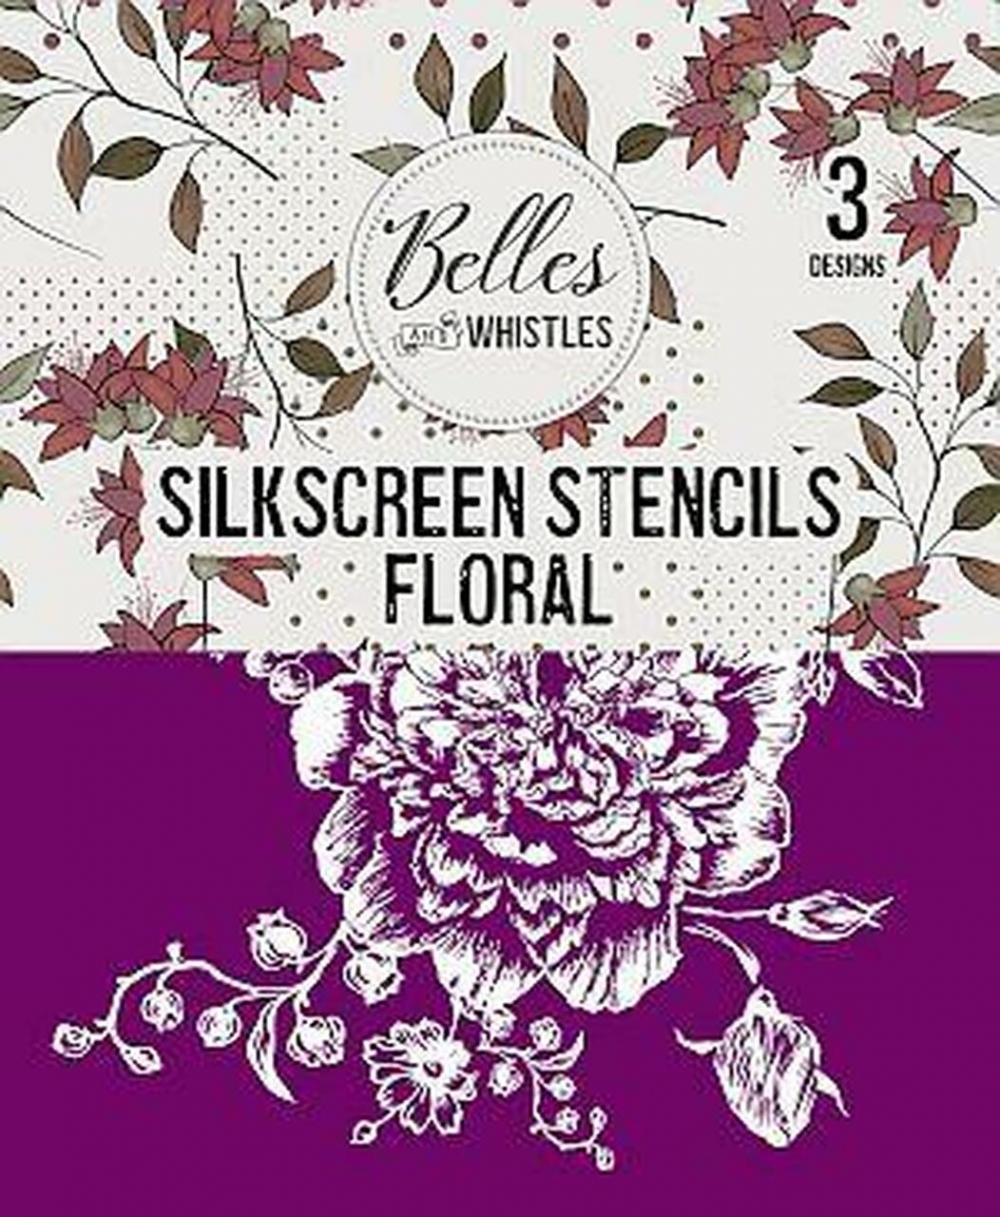 Belles and Whistles Silkscreen Stencil – Lightweight Adhesive – Reusable – Floral 20x25cm